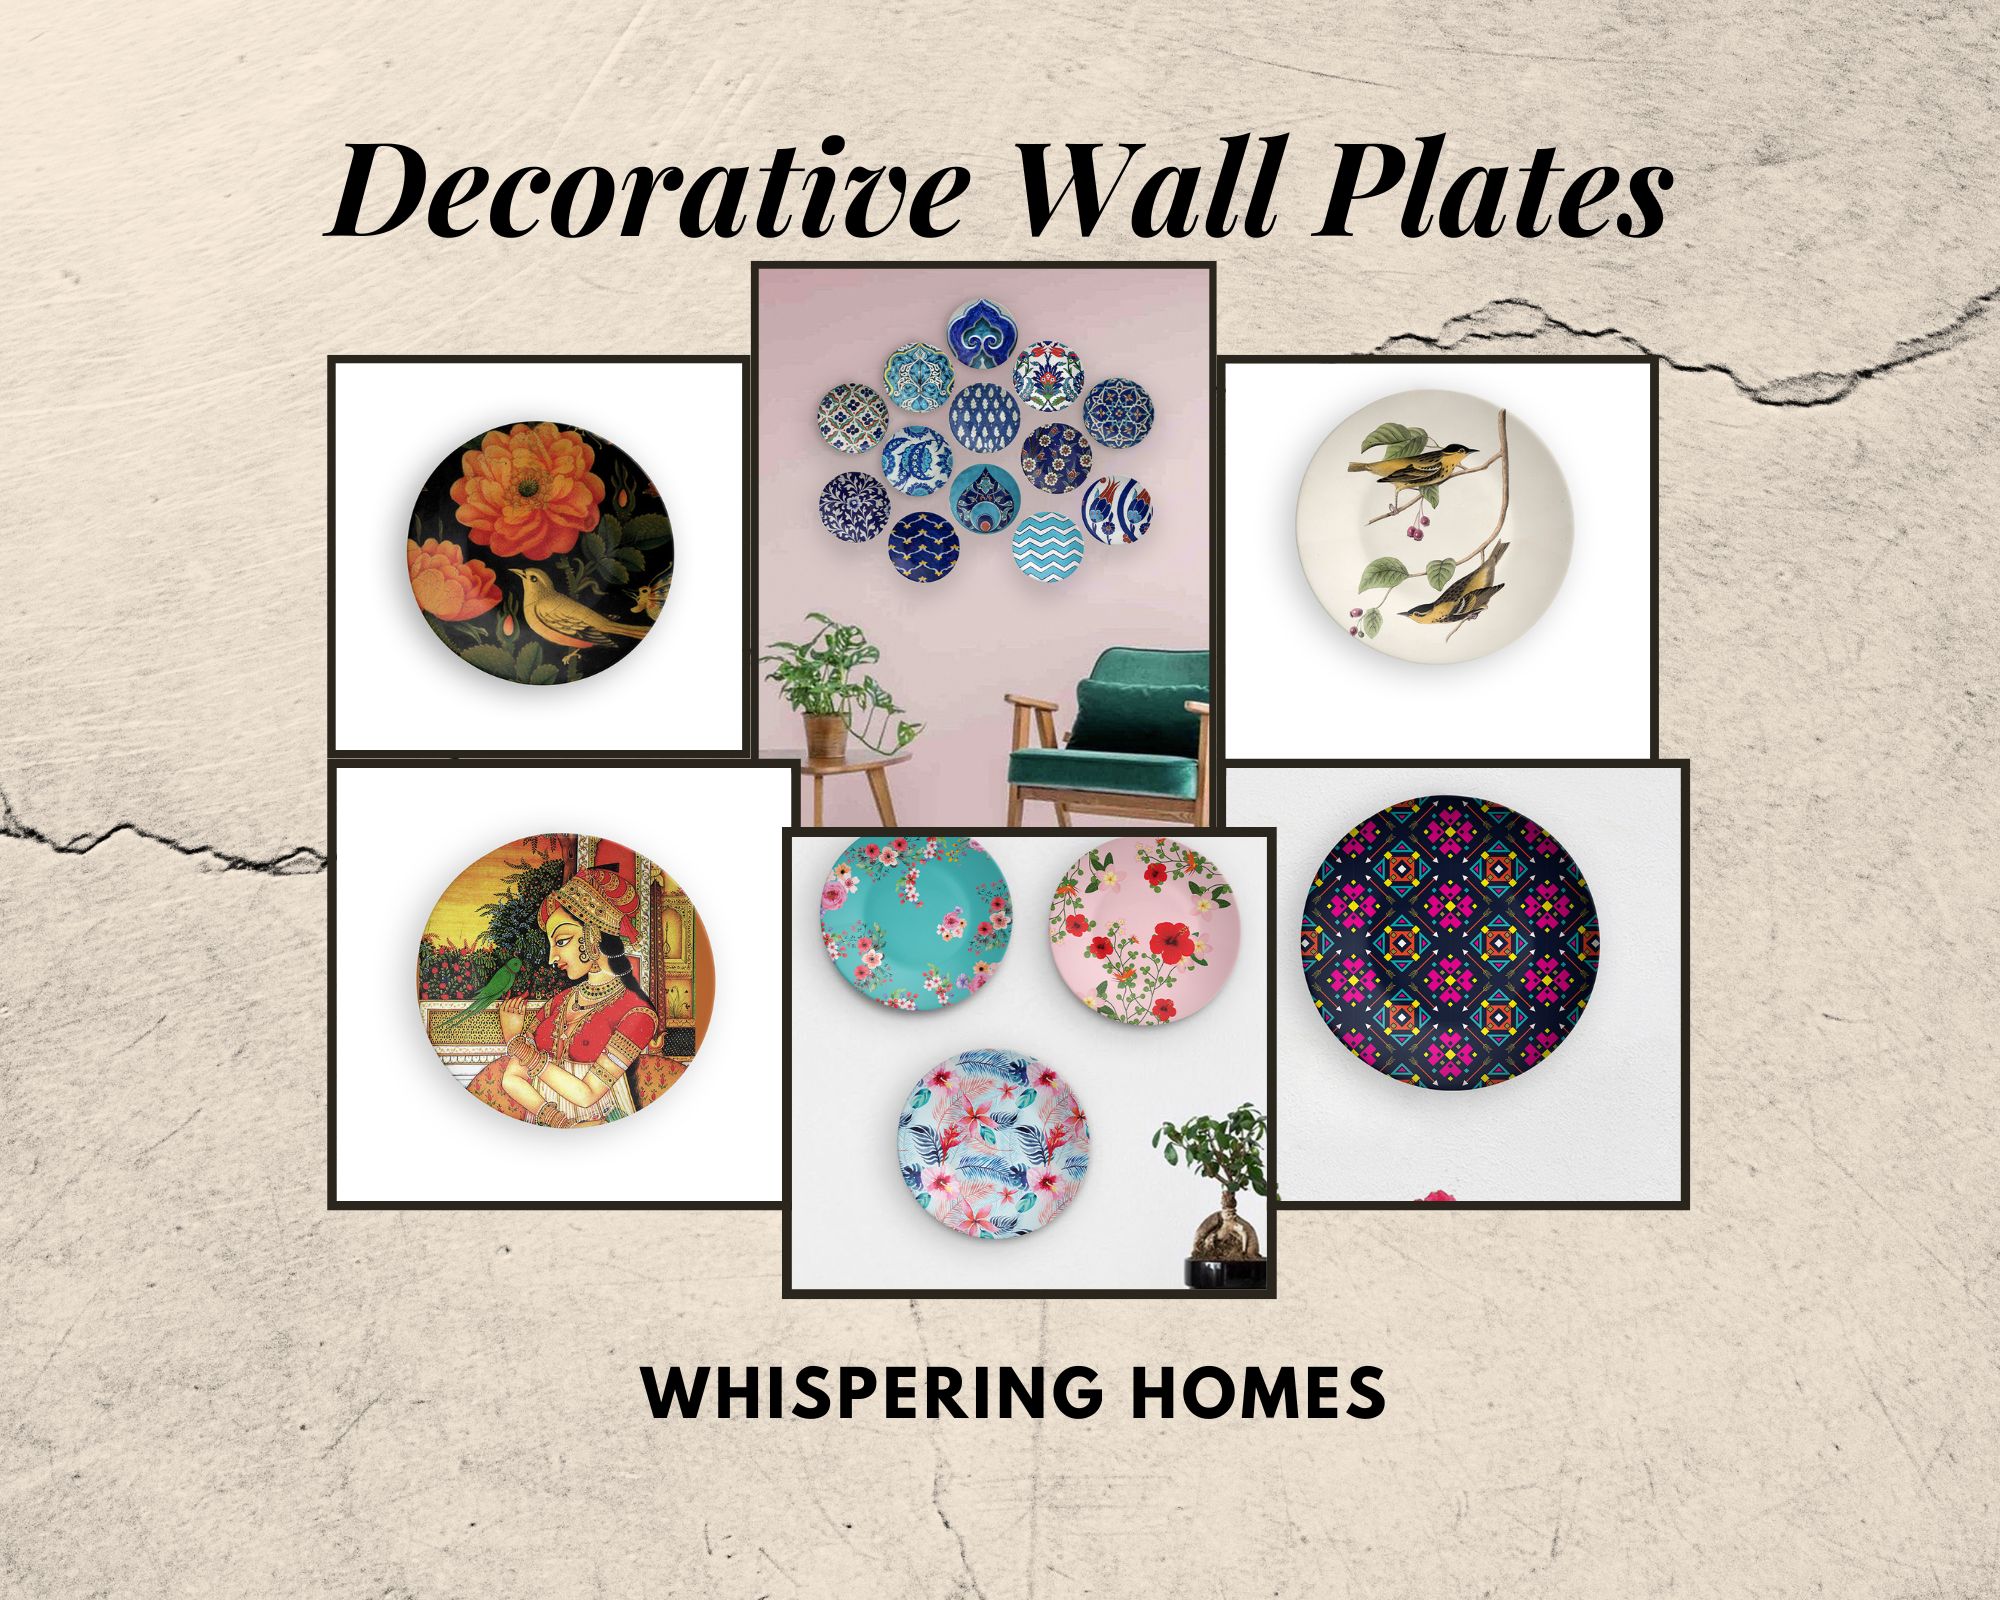 Decorative Wall Plates: The Most Awaited Comeback